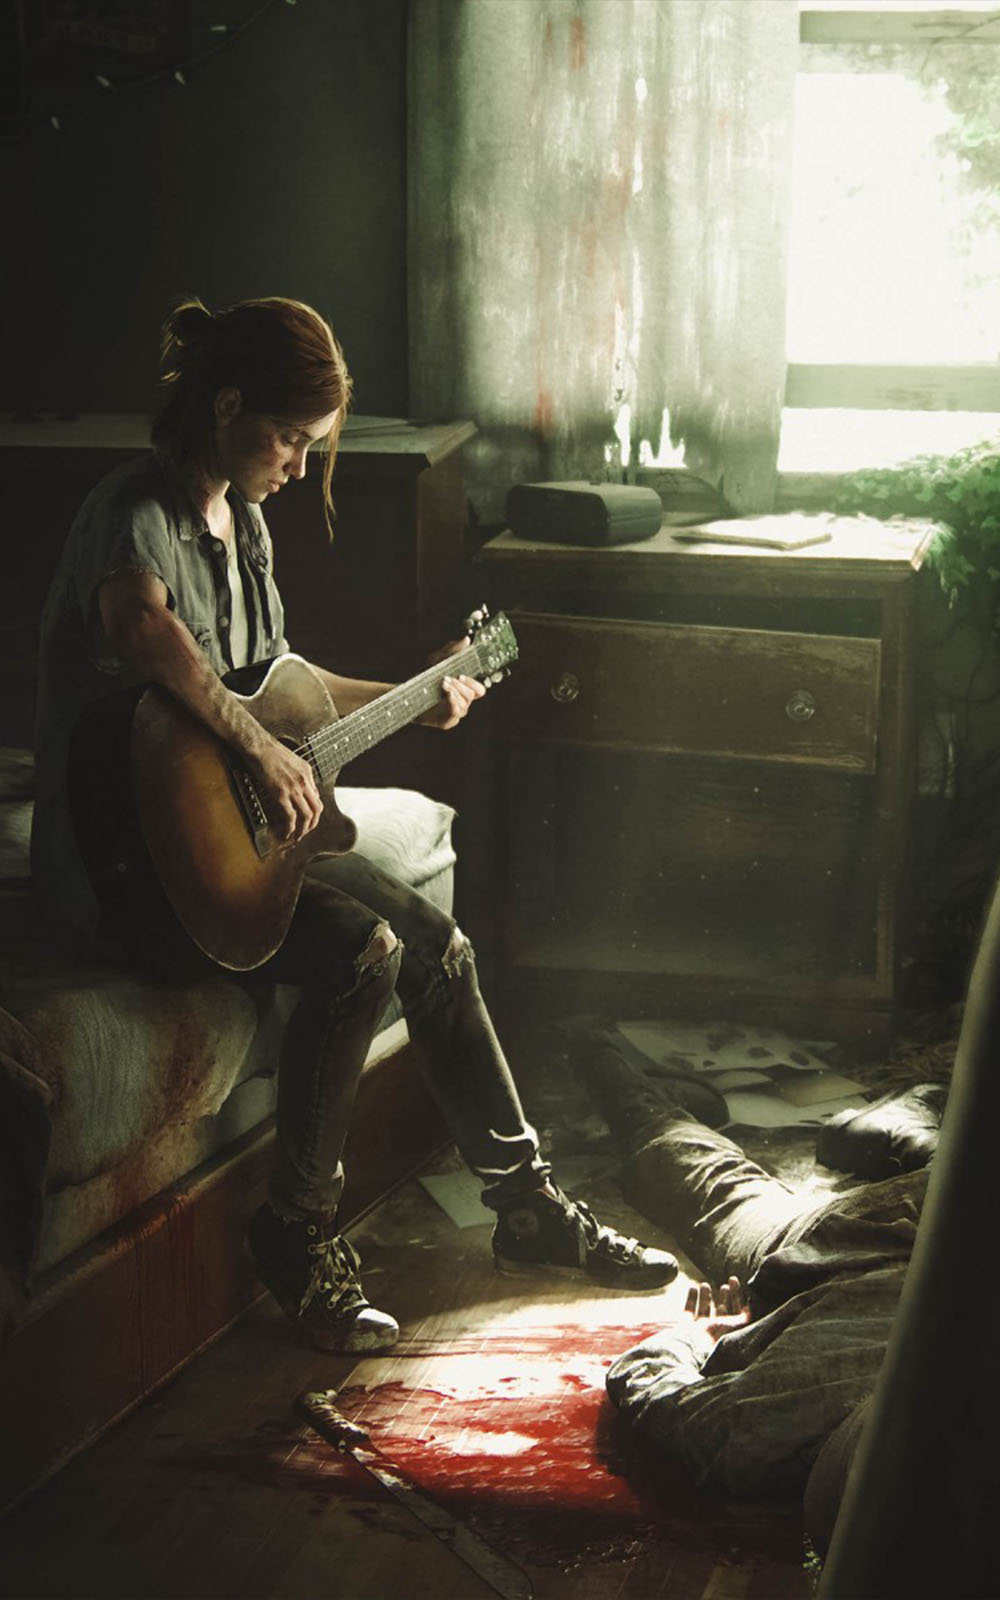 Ellie In The Last Of Us 2 Download Free Hd Mobile Wallpapers